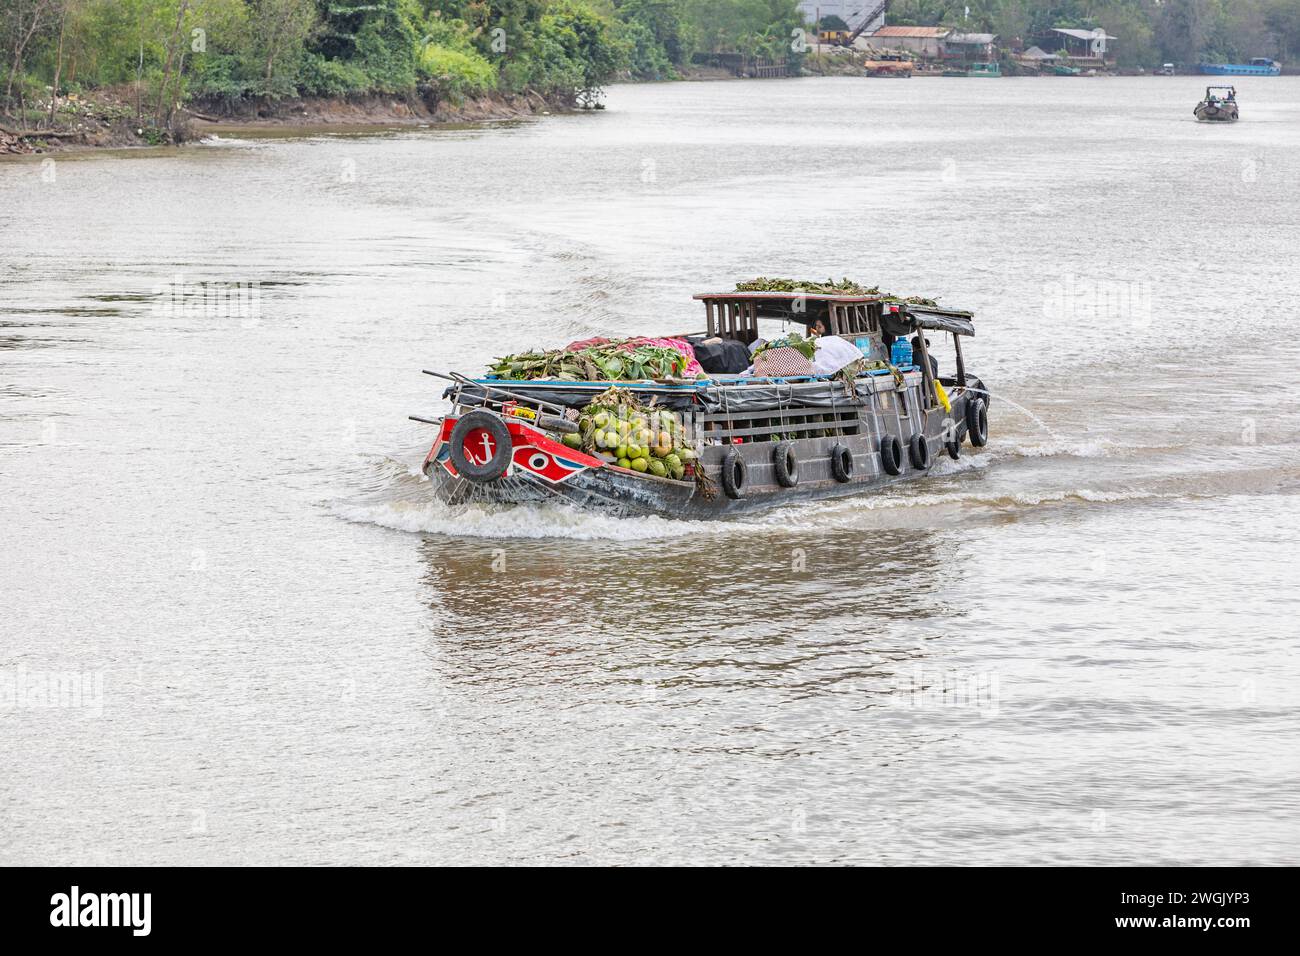 A boat heavily laden with coconuts on the Mekong river delta, near to Vinh Long, Vietnam. Stock Photo